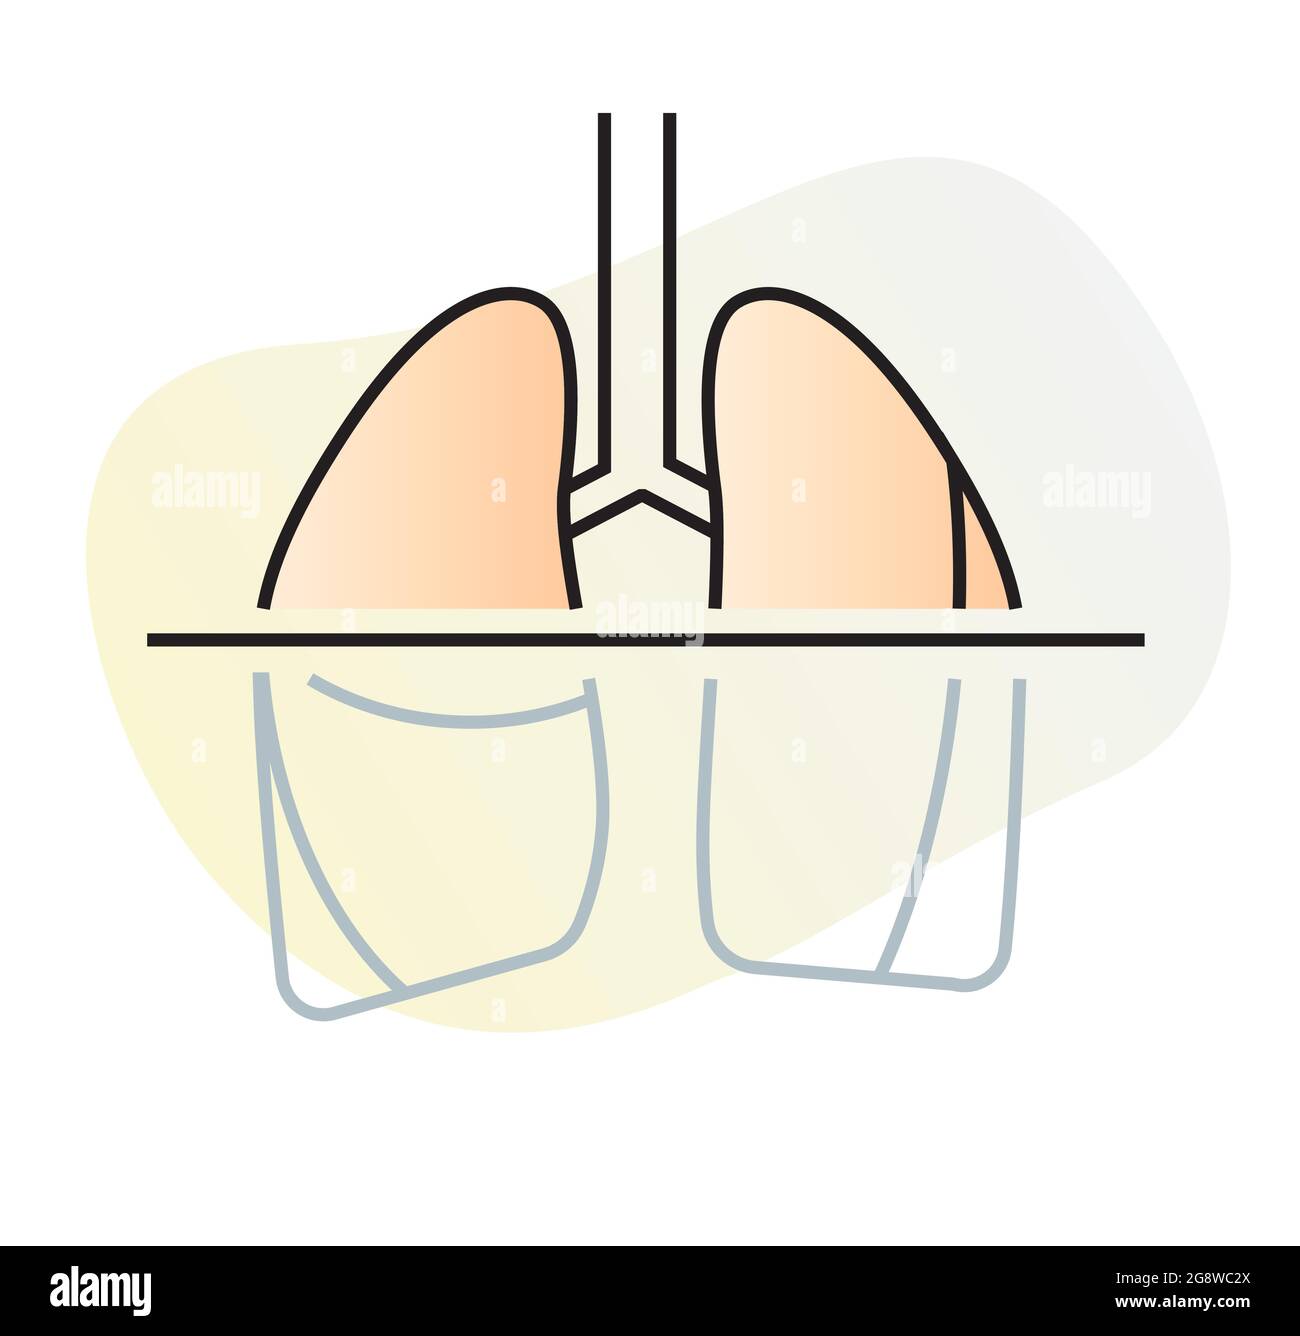 Covid-19 Testing - Human Lungs CT Scan - Illustration as EPS 10 File Stock Vector